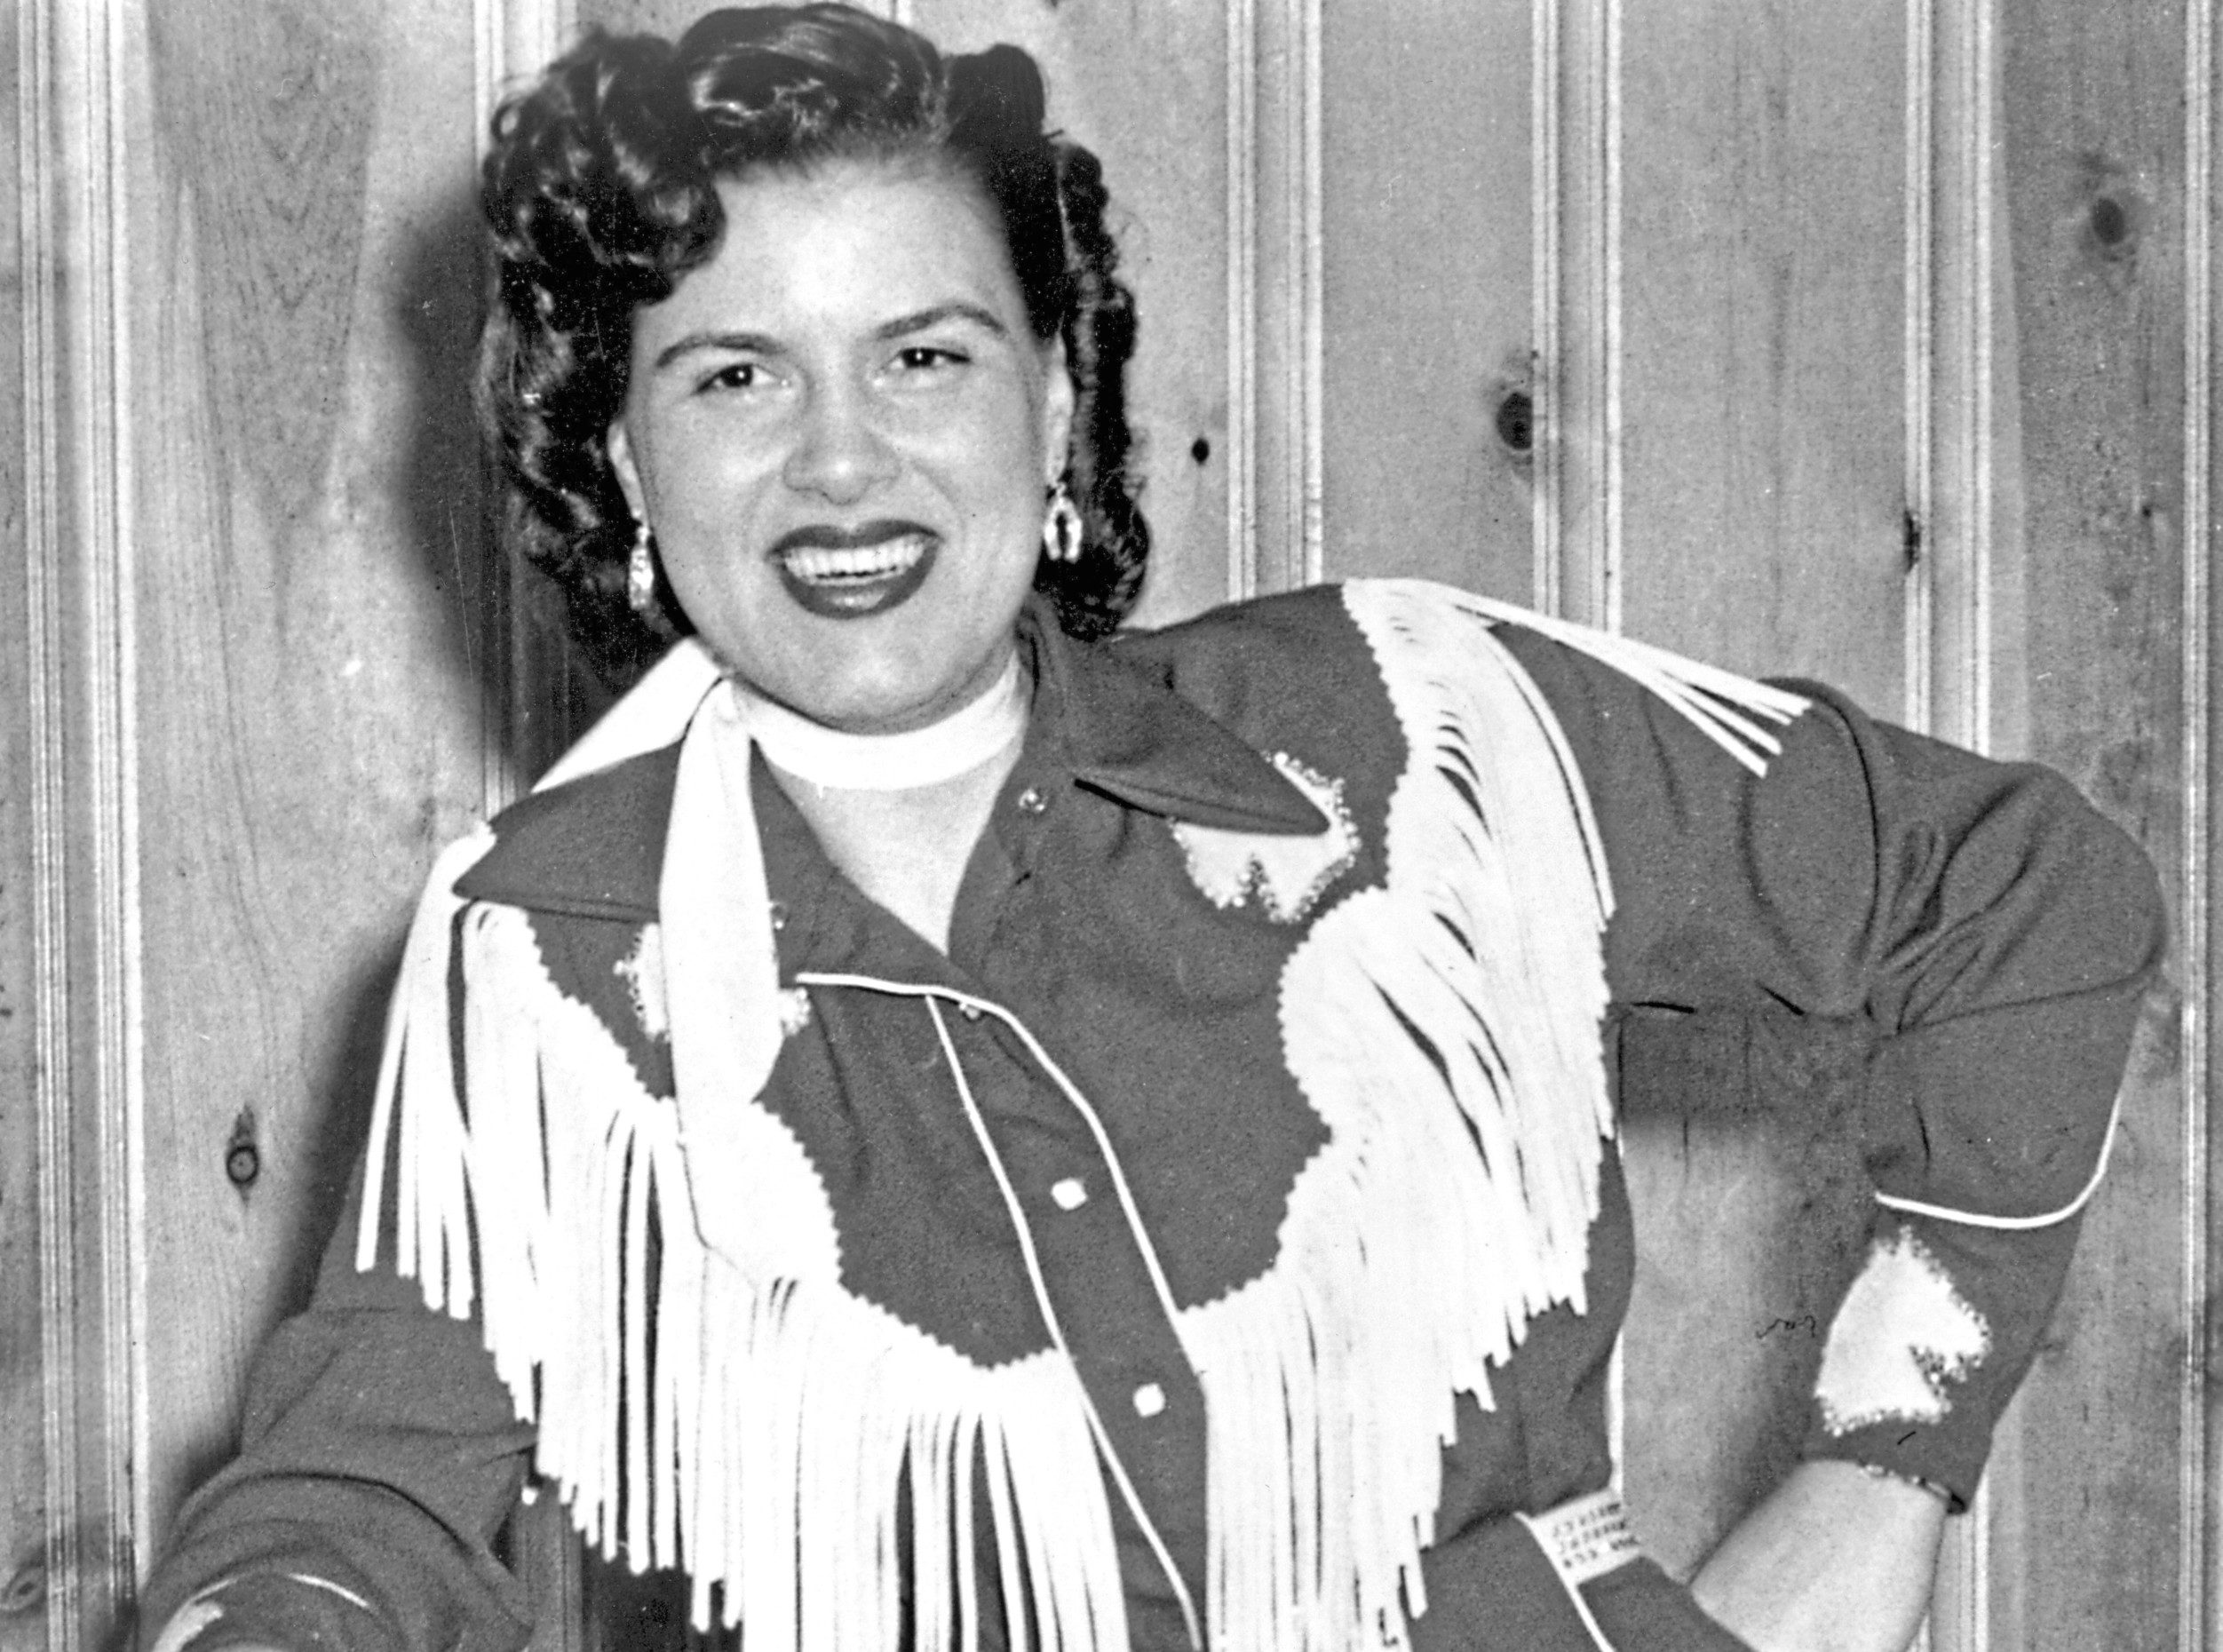 CIRCA 1958:  Country musician Patsy Cline plays the piano wearing a fringed dress and holding a cowboy hat in circa 1958.